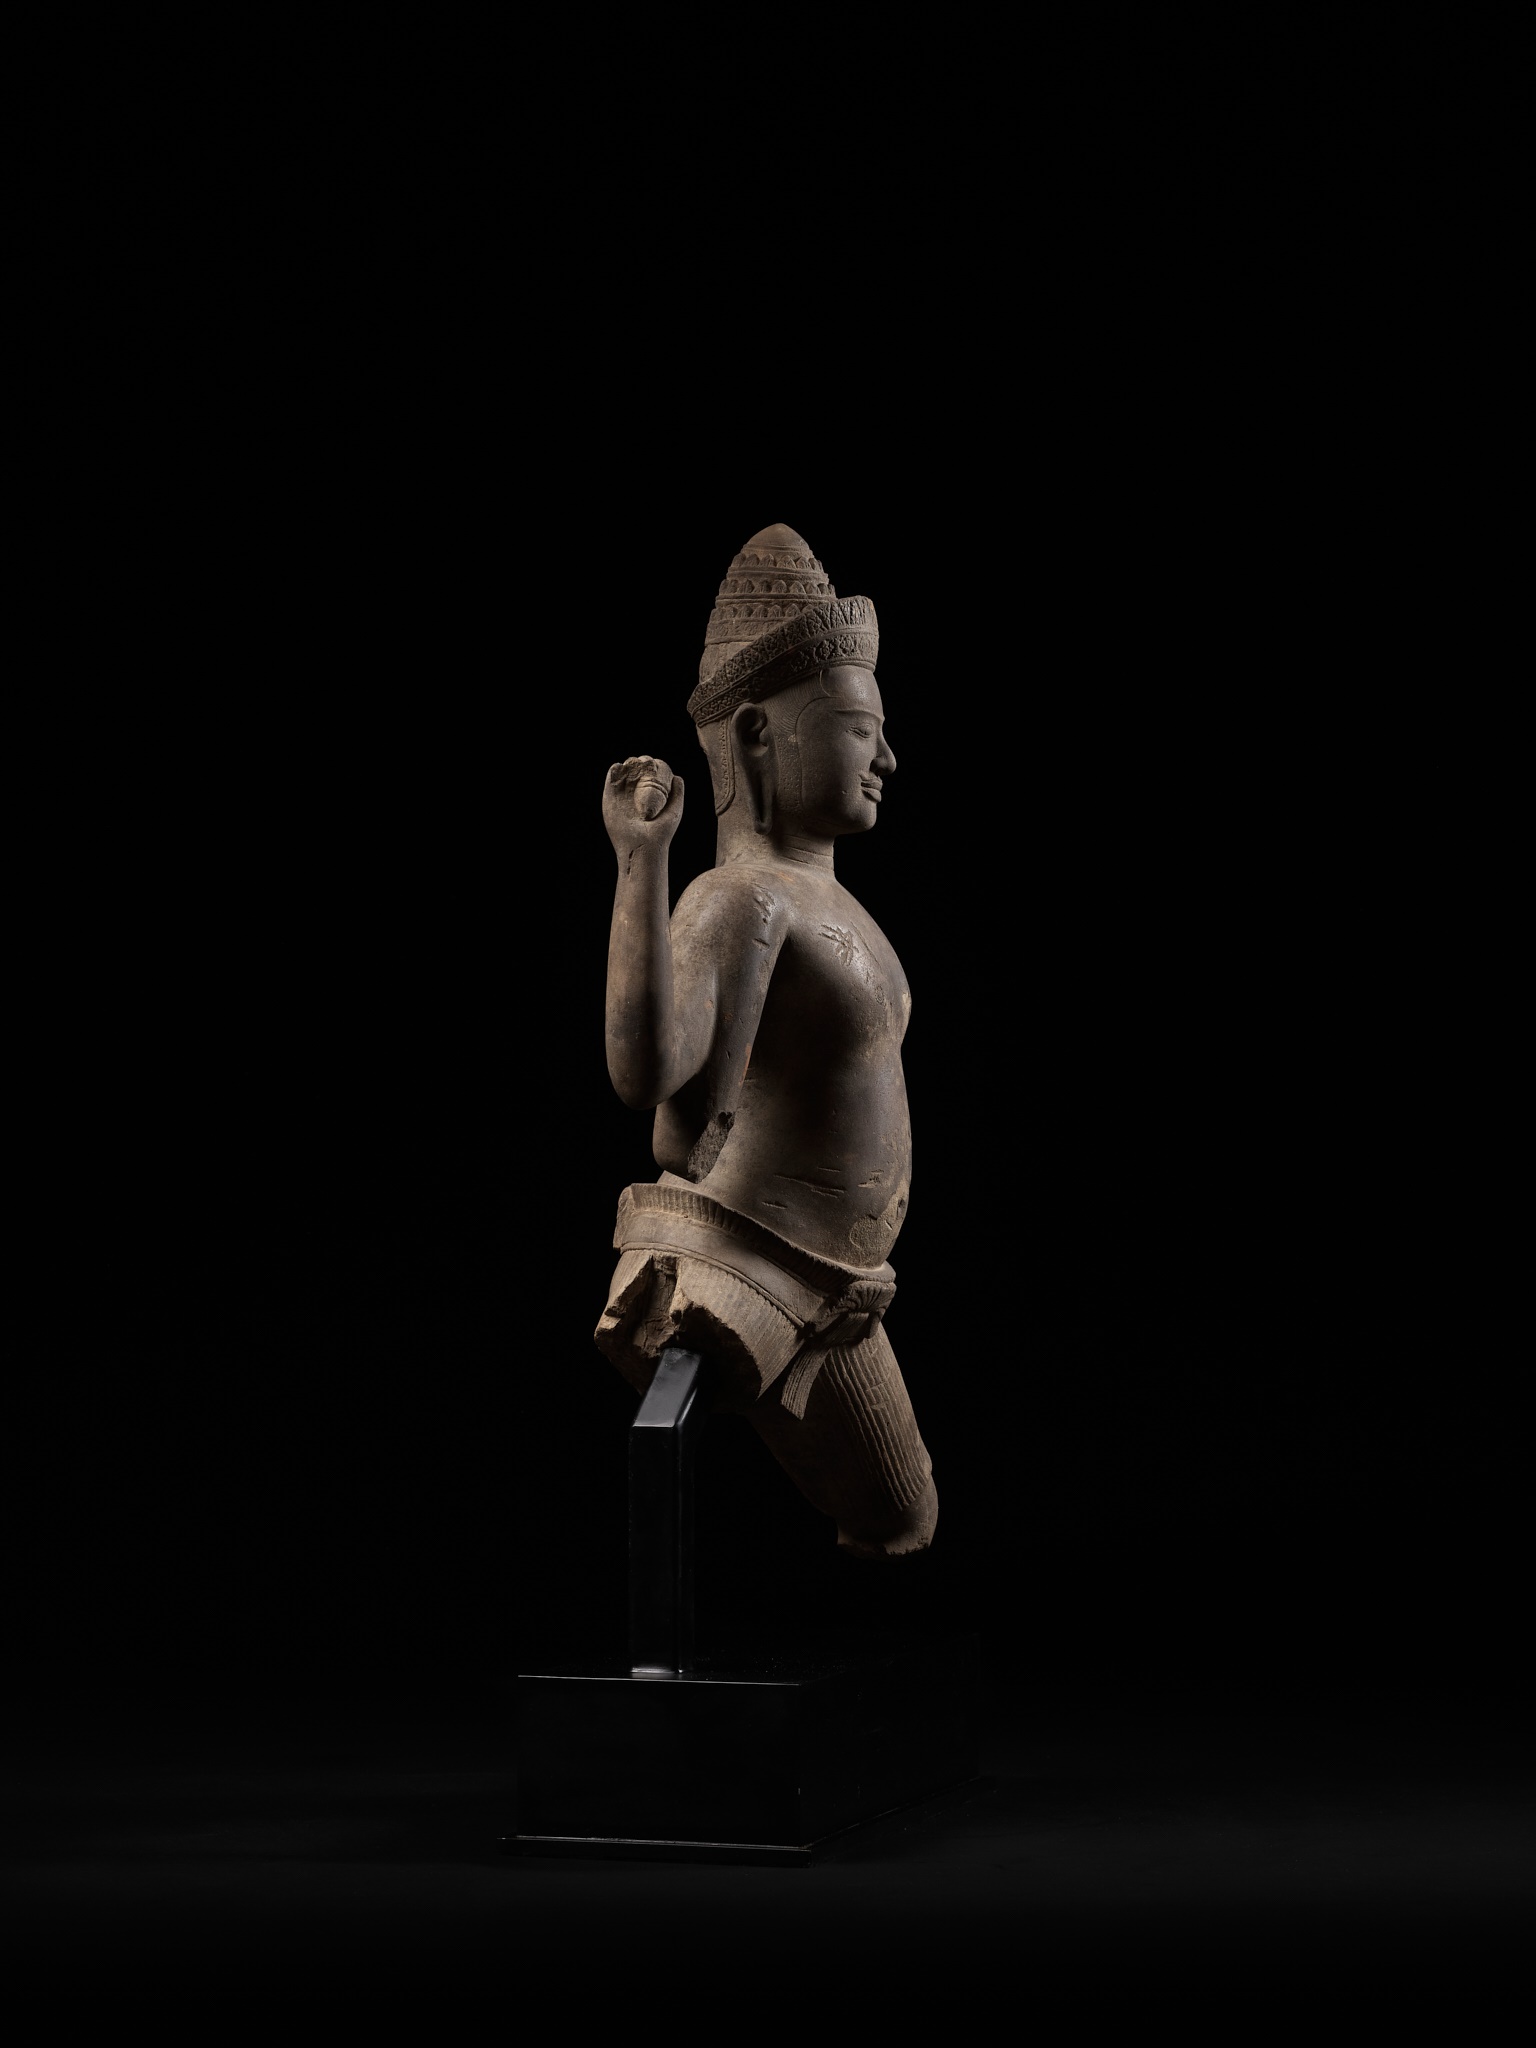 A KHMER SANDSTONE FIGURE OF A MALE DEITY, ANGKOR PERIOD - Image 12 of 13